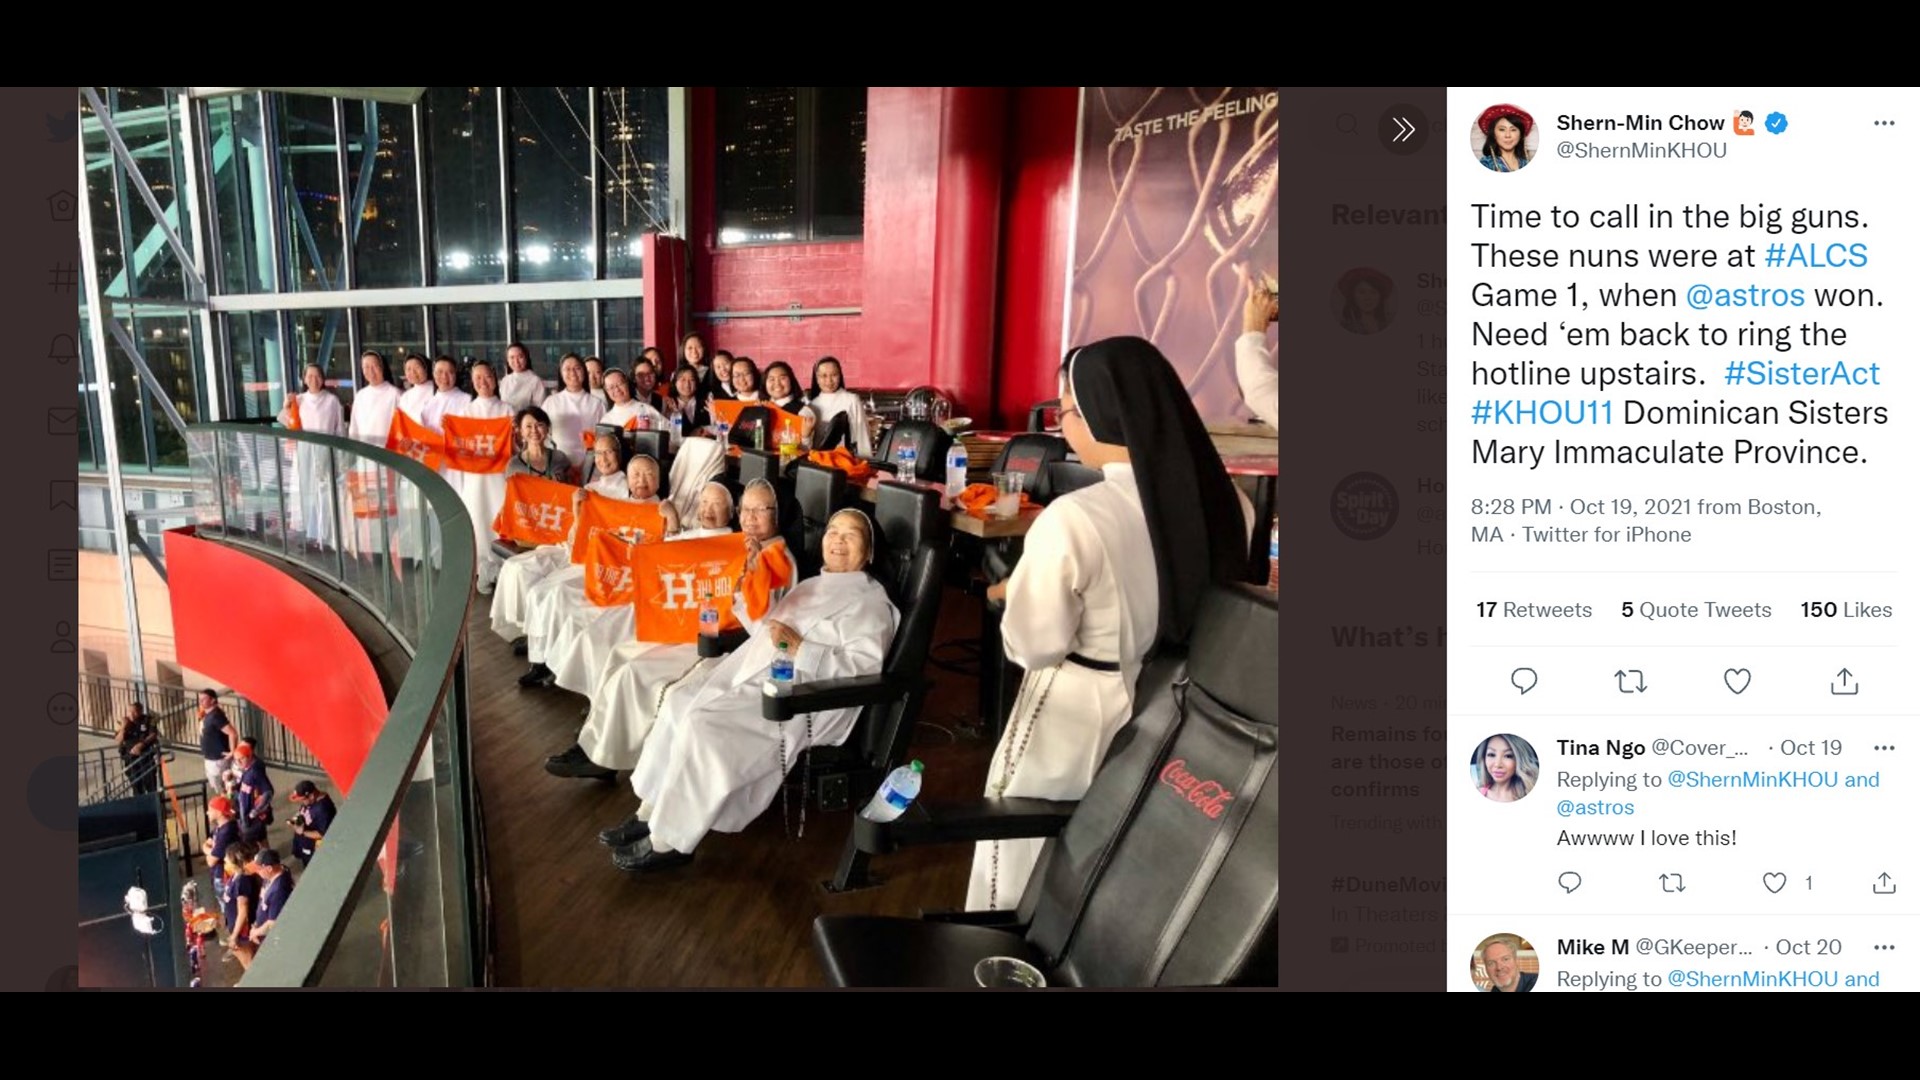 Mattress Mack introduce some new good luck charms for the Houston Astros: Nuns from the Dominican Sister of Mary Immaculate Province.